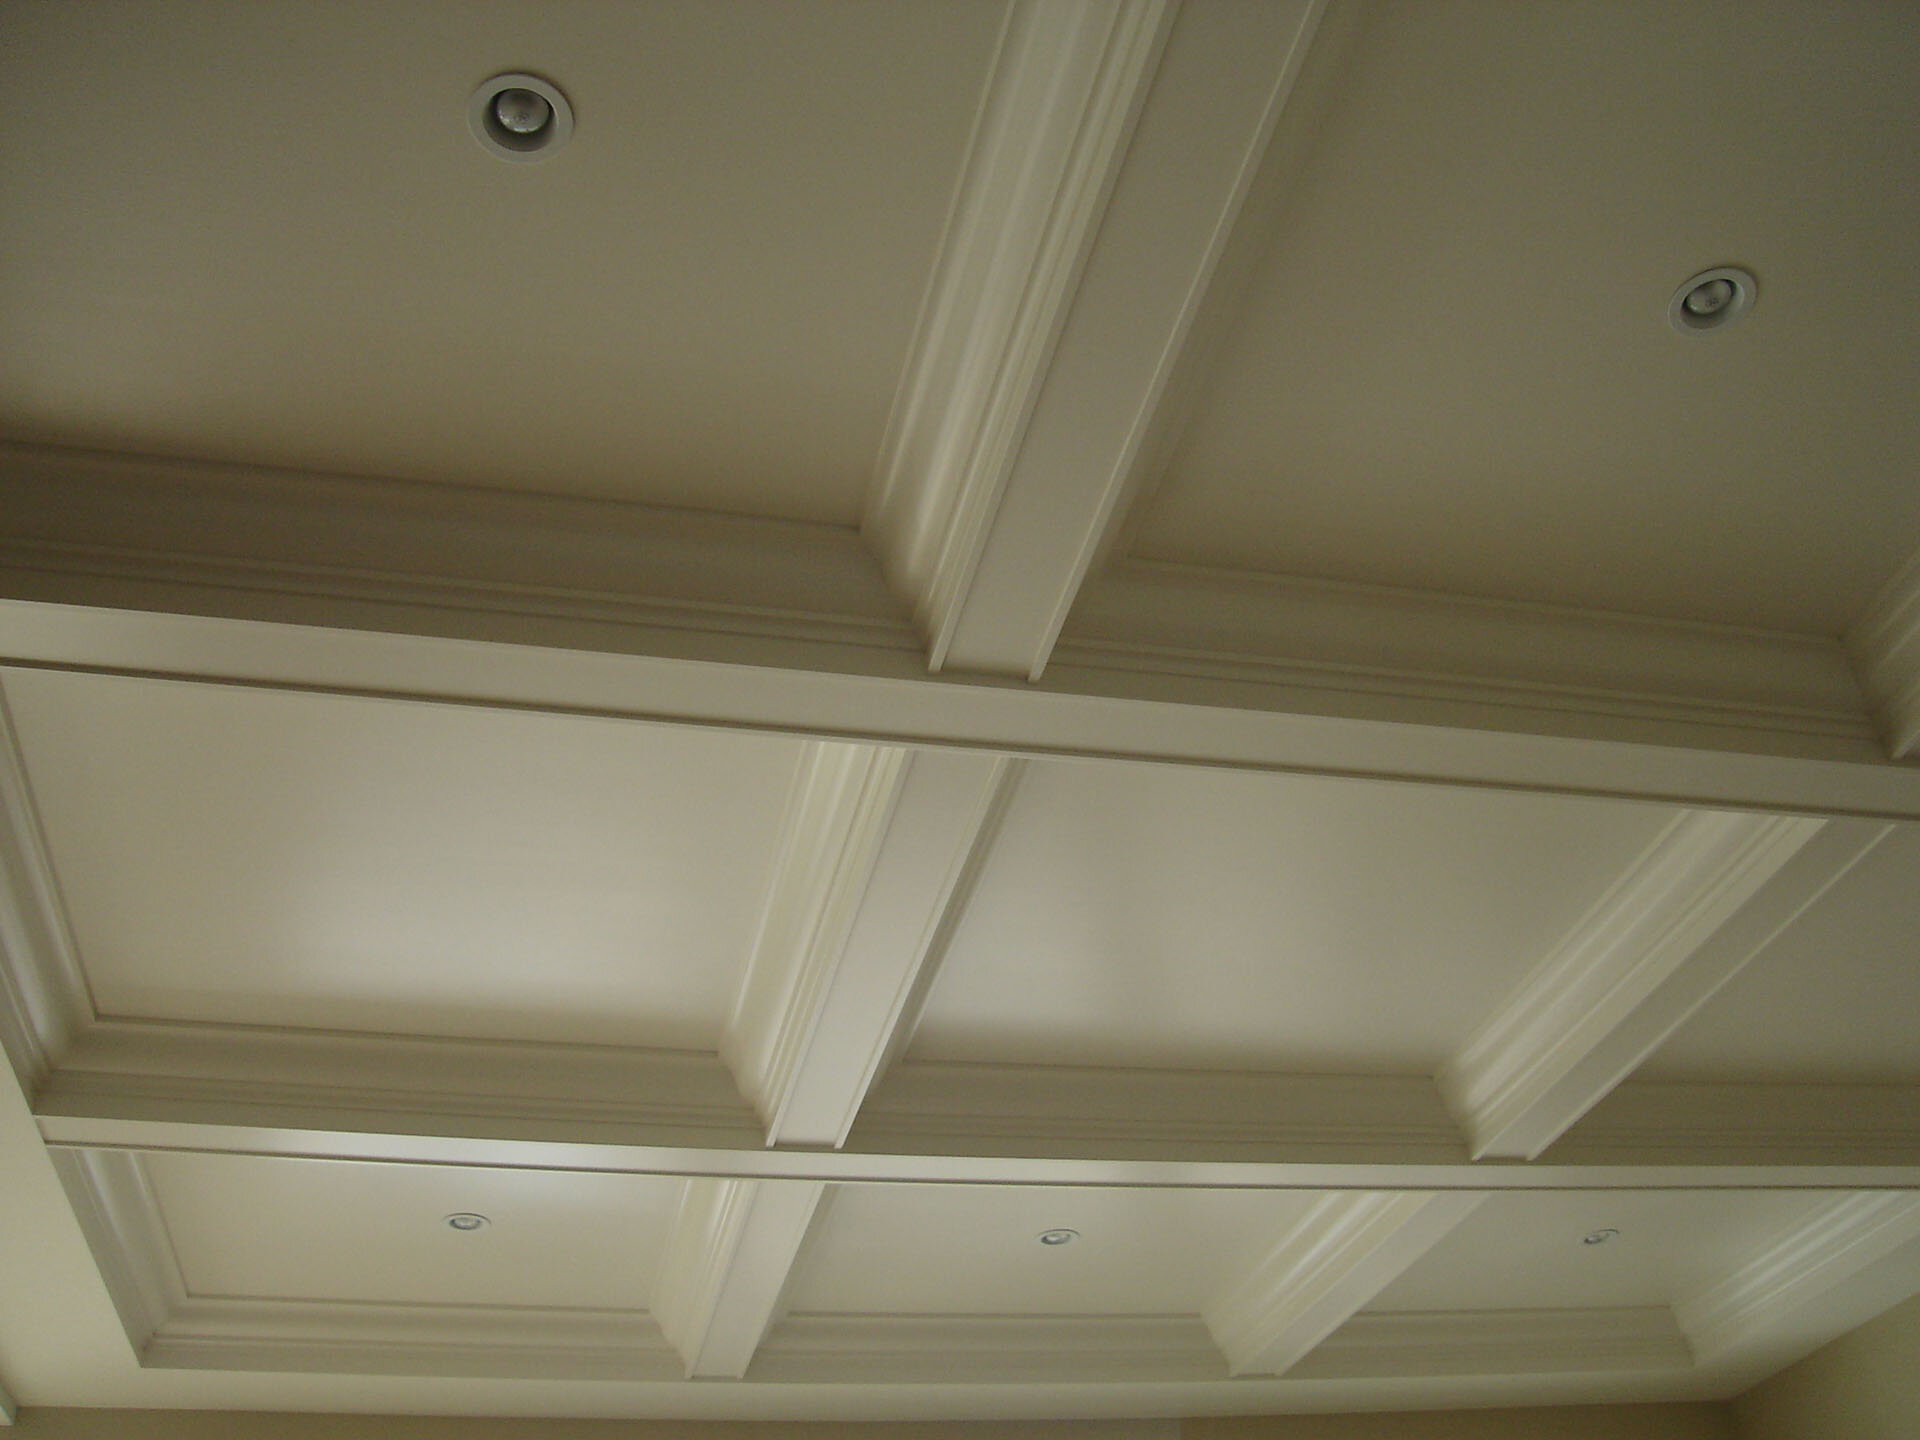 millwork-finishing-and-painting-abbotsford-bc7.jpg